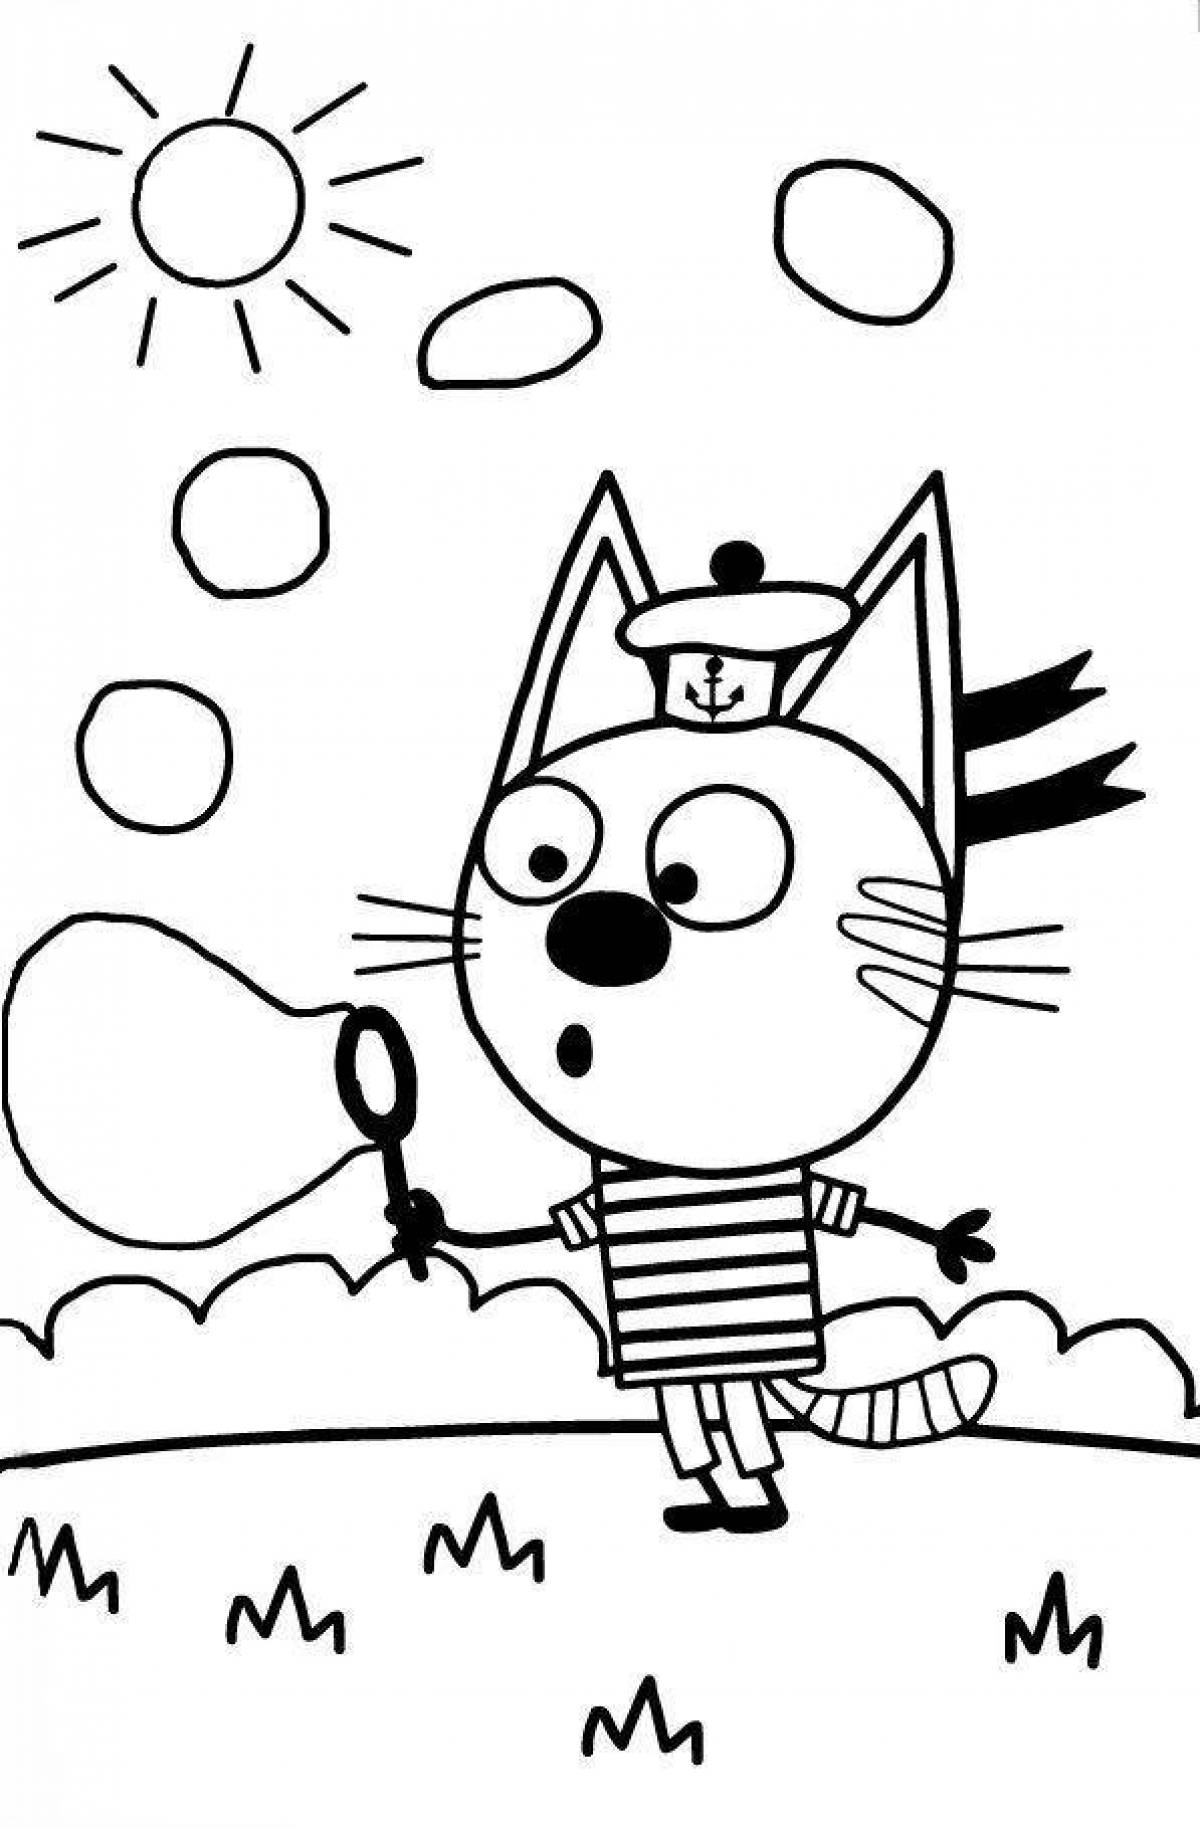 Jovial 3 cats coloring page for babies